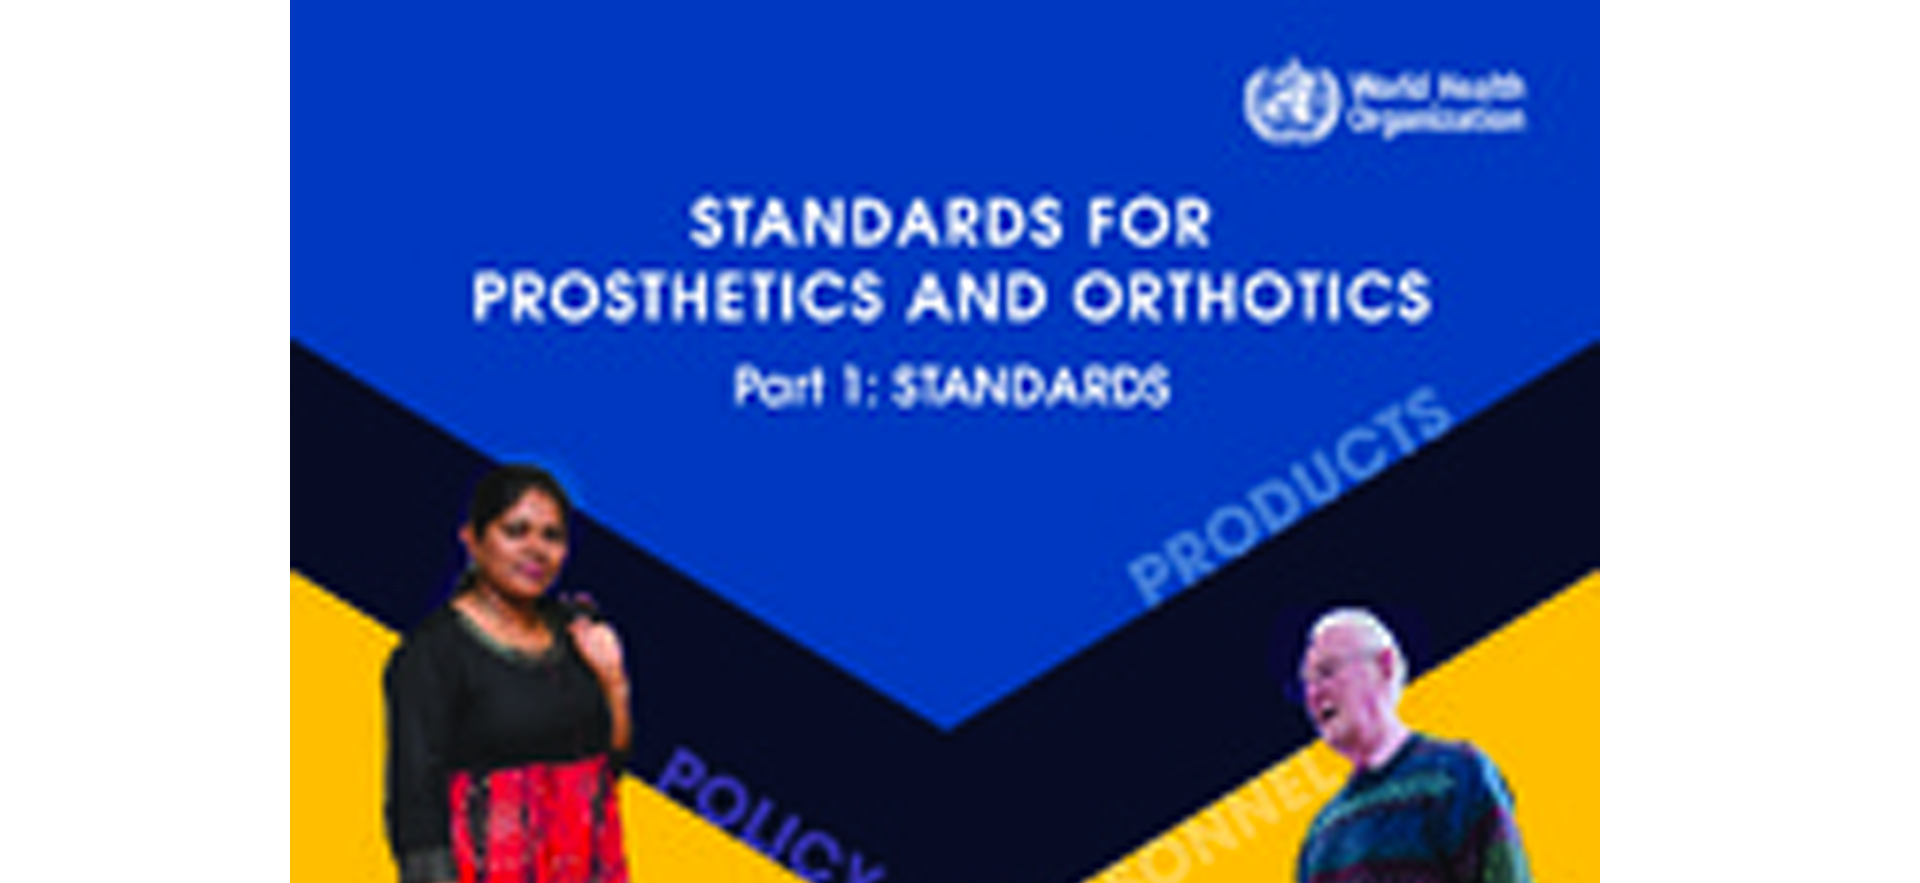 who-standards-for-prosthetics-and-orthotics